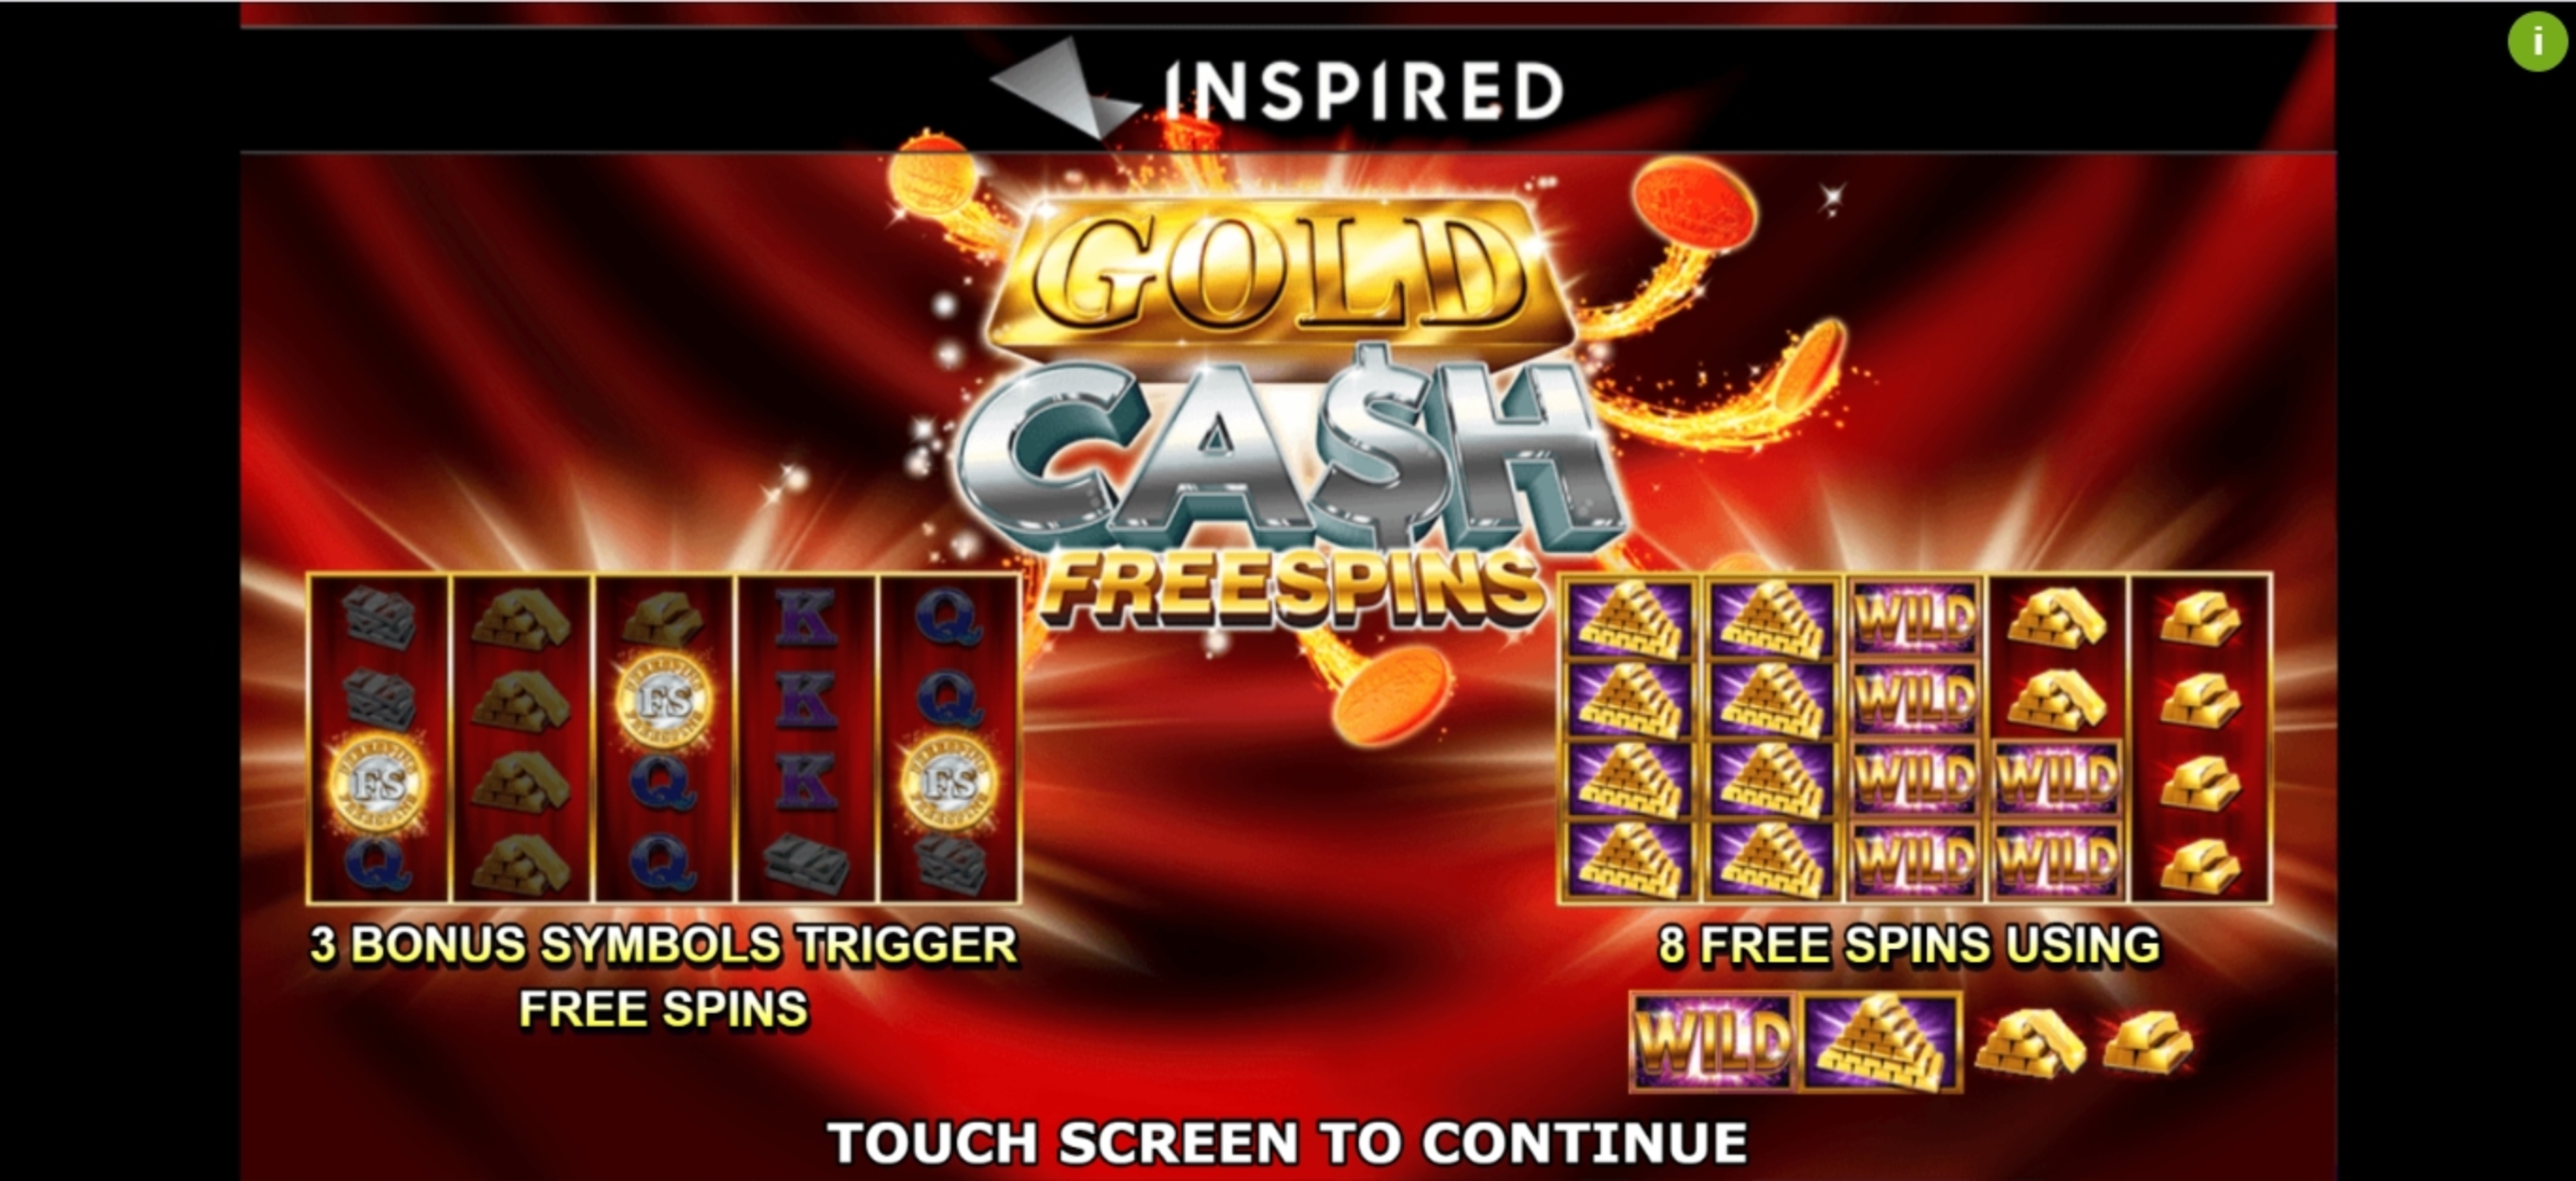 Play Gold Cash Free Spins Free Casino Slot Game by Inspired Gaming